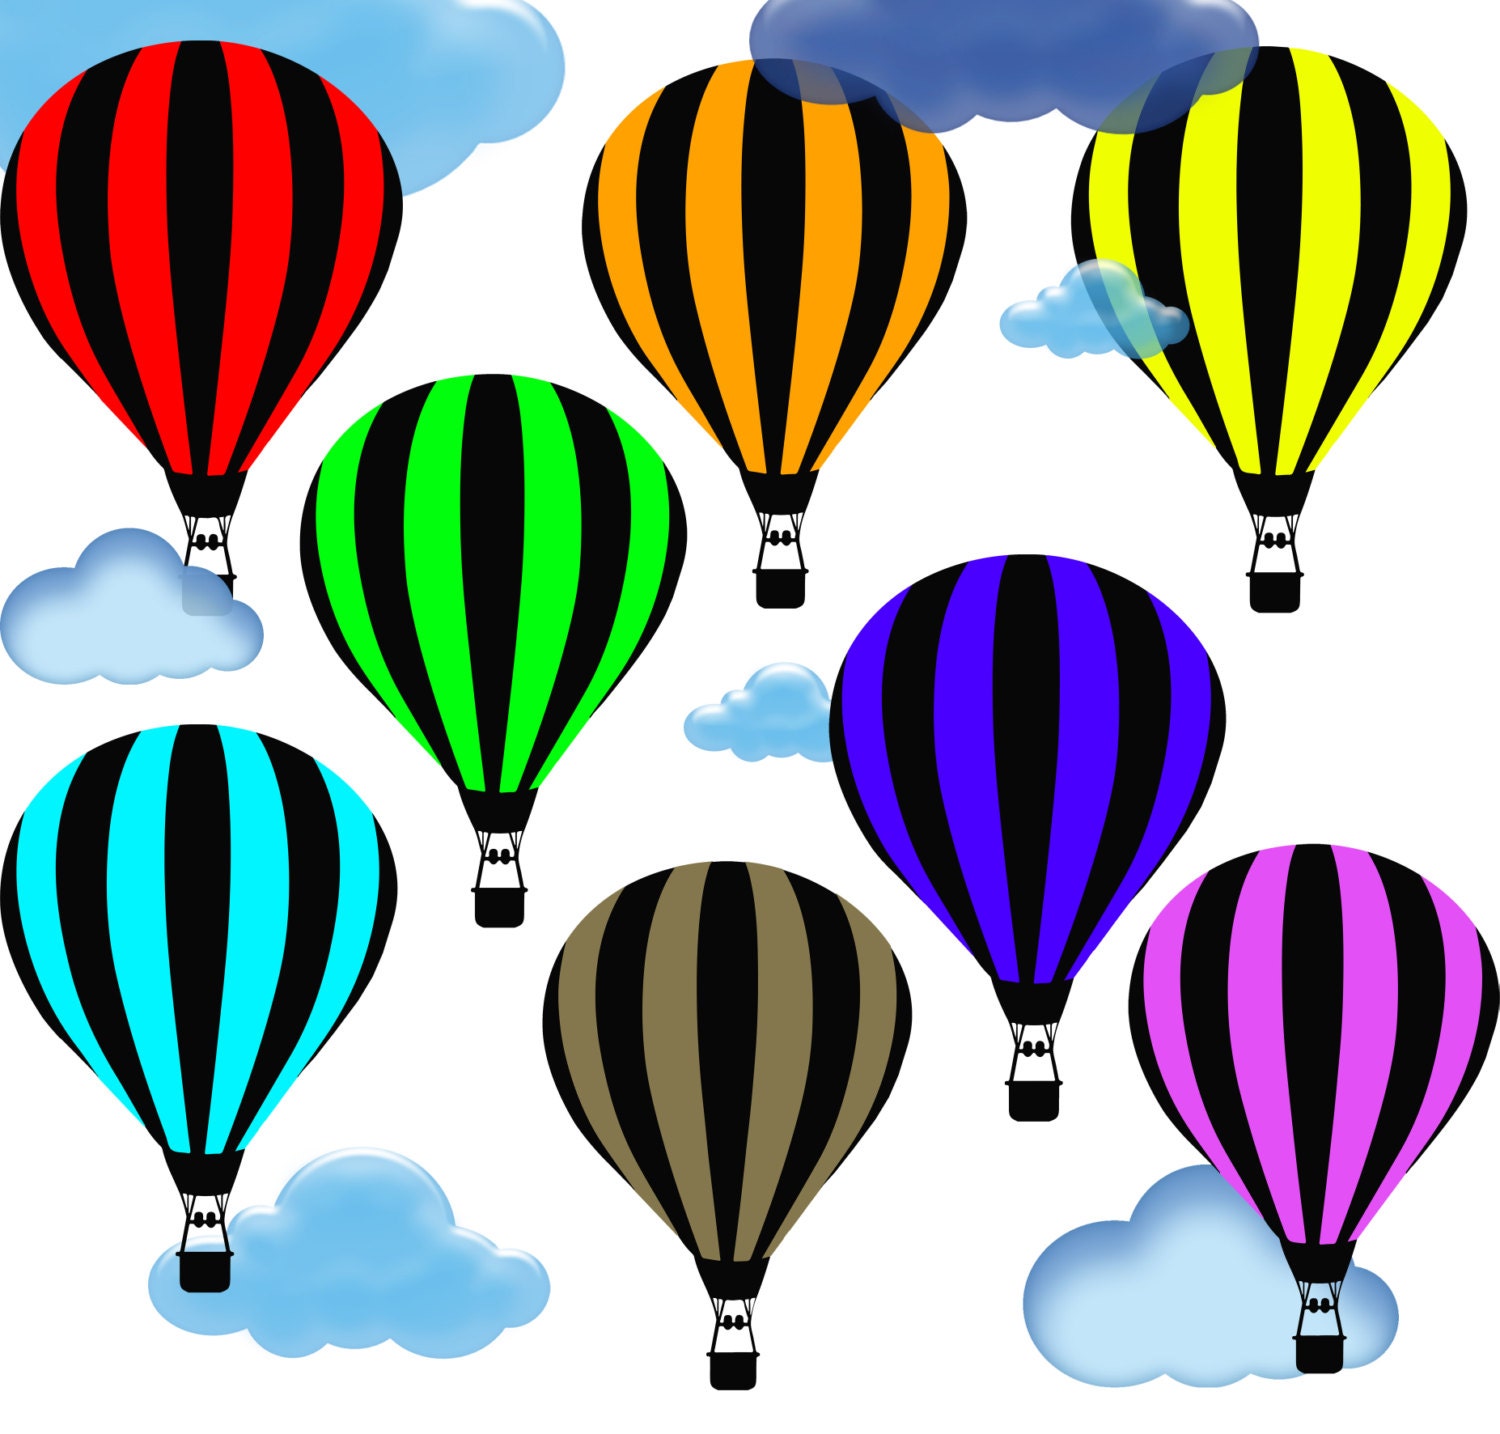 Printable Hot Air Balloon That are Zany Russell Website